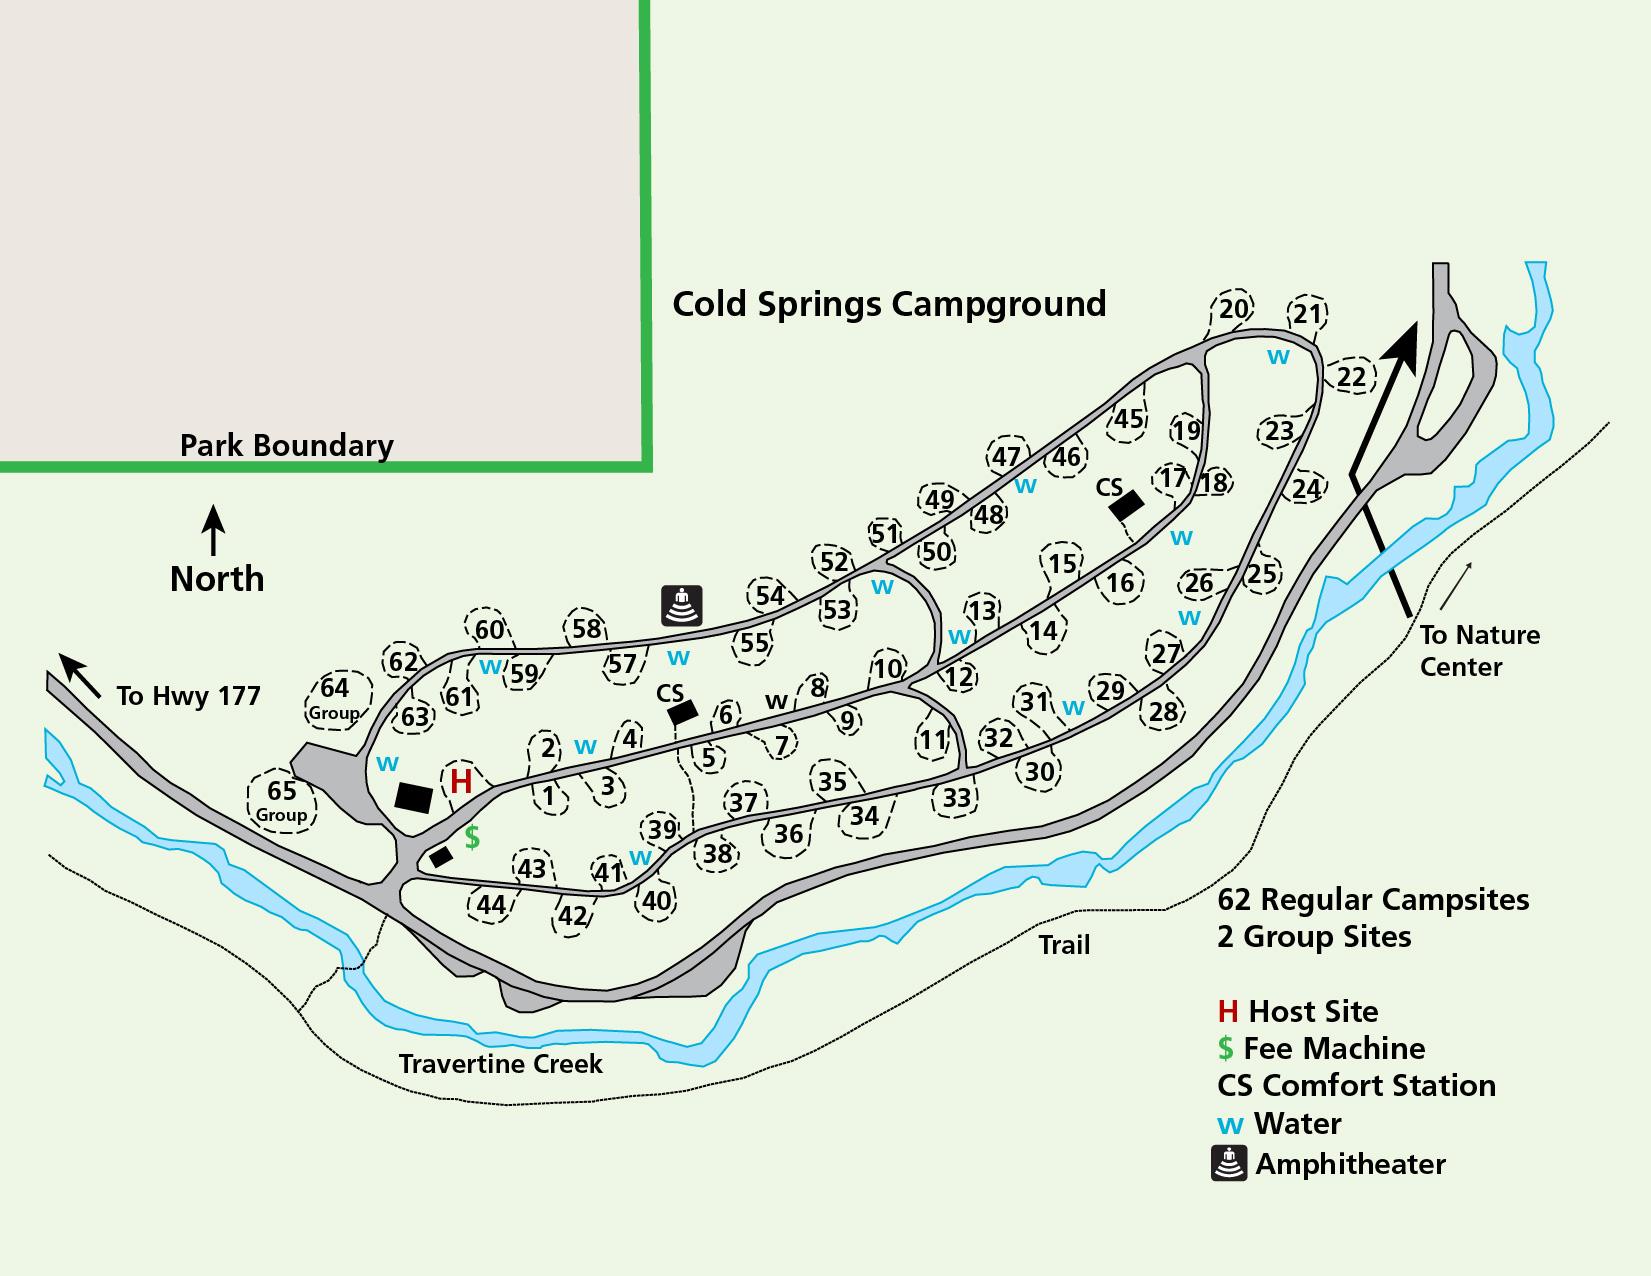 A map of Cold Springs Campground showing locations of campsites, restrooms, water, and more.